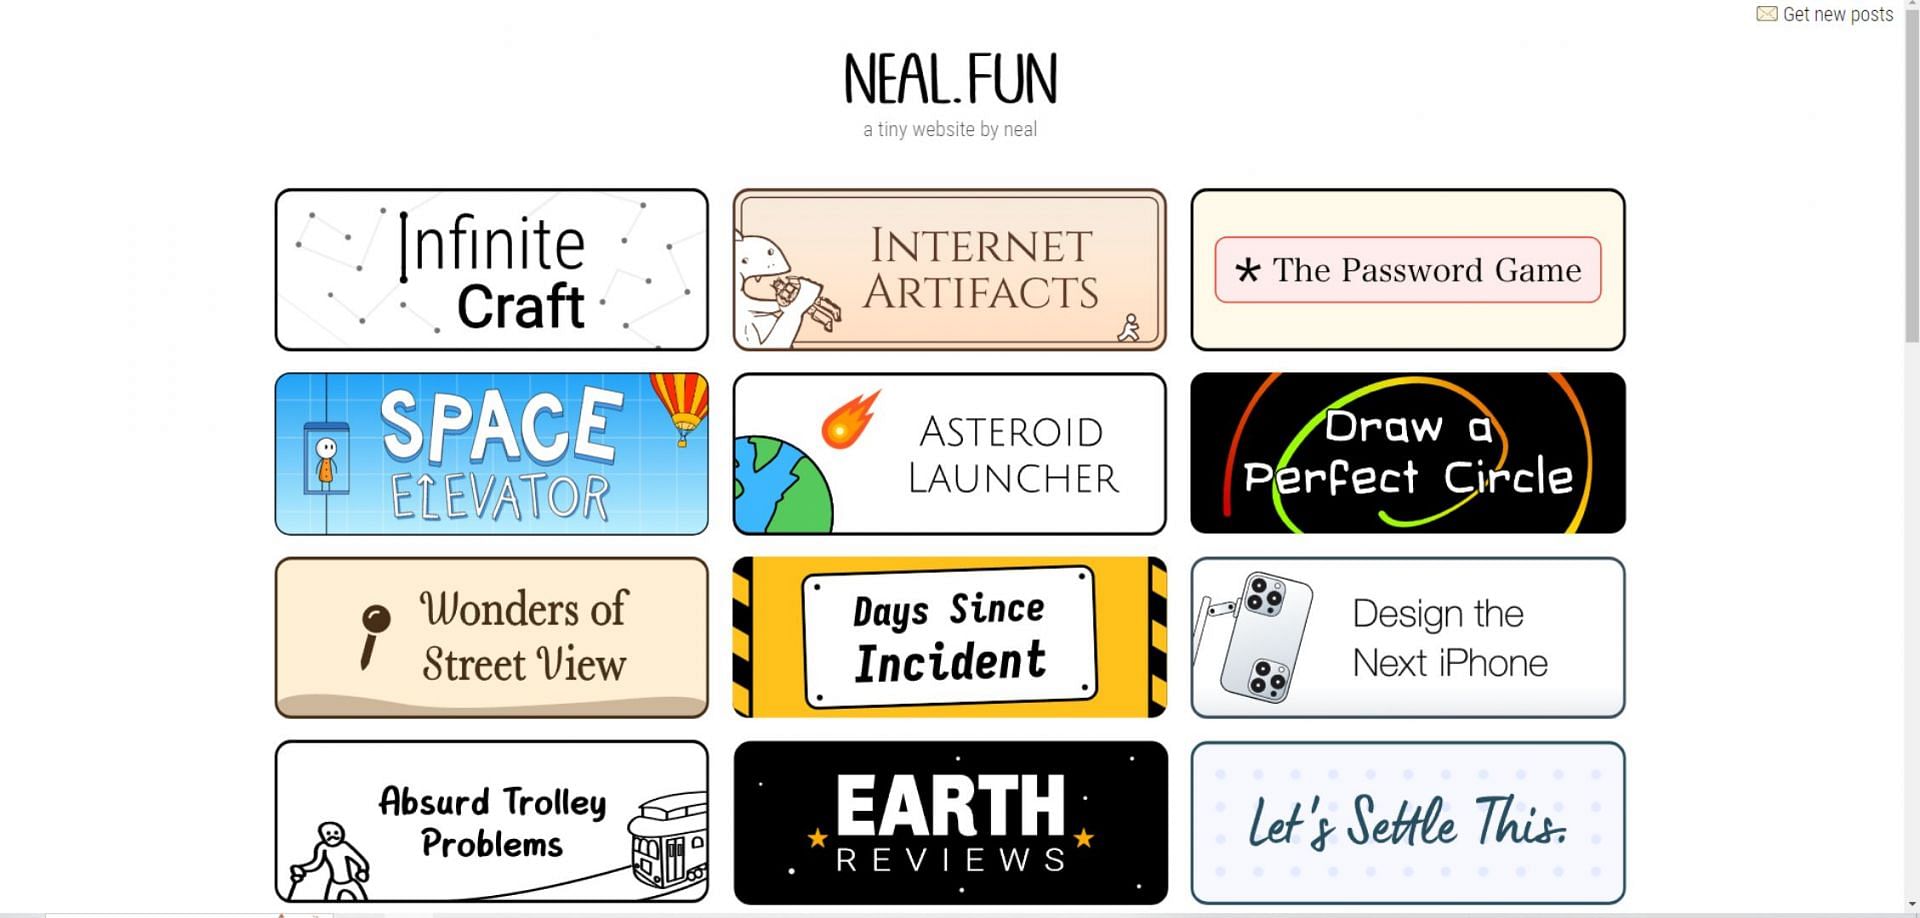 Best Neal.Fun games to play other than Infinite Craft